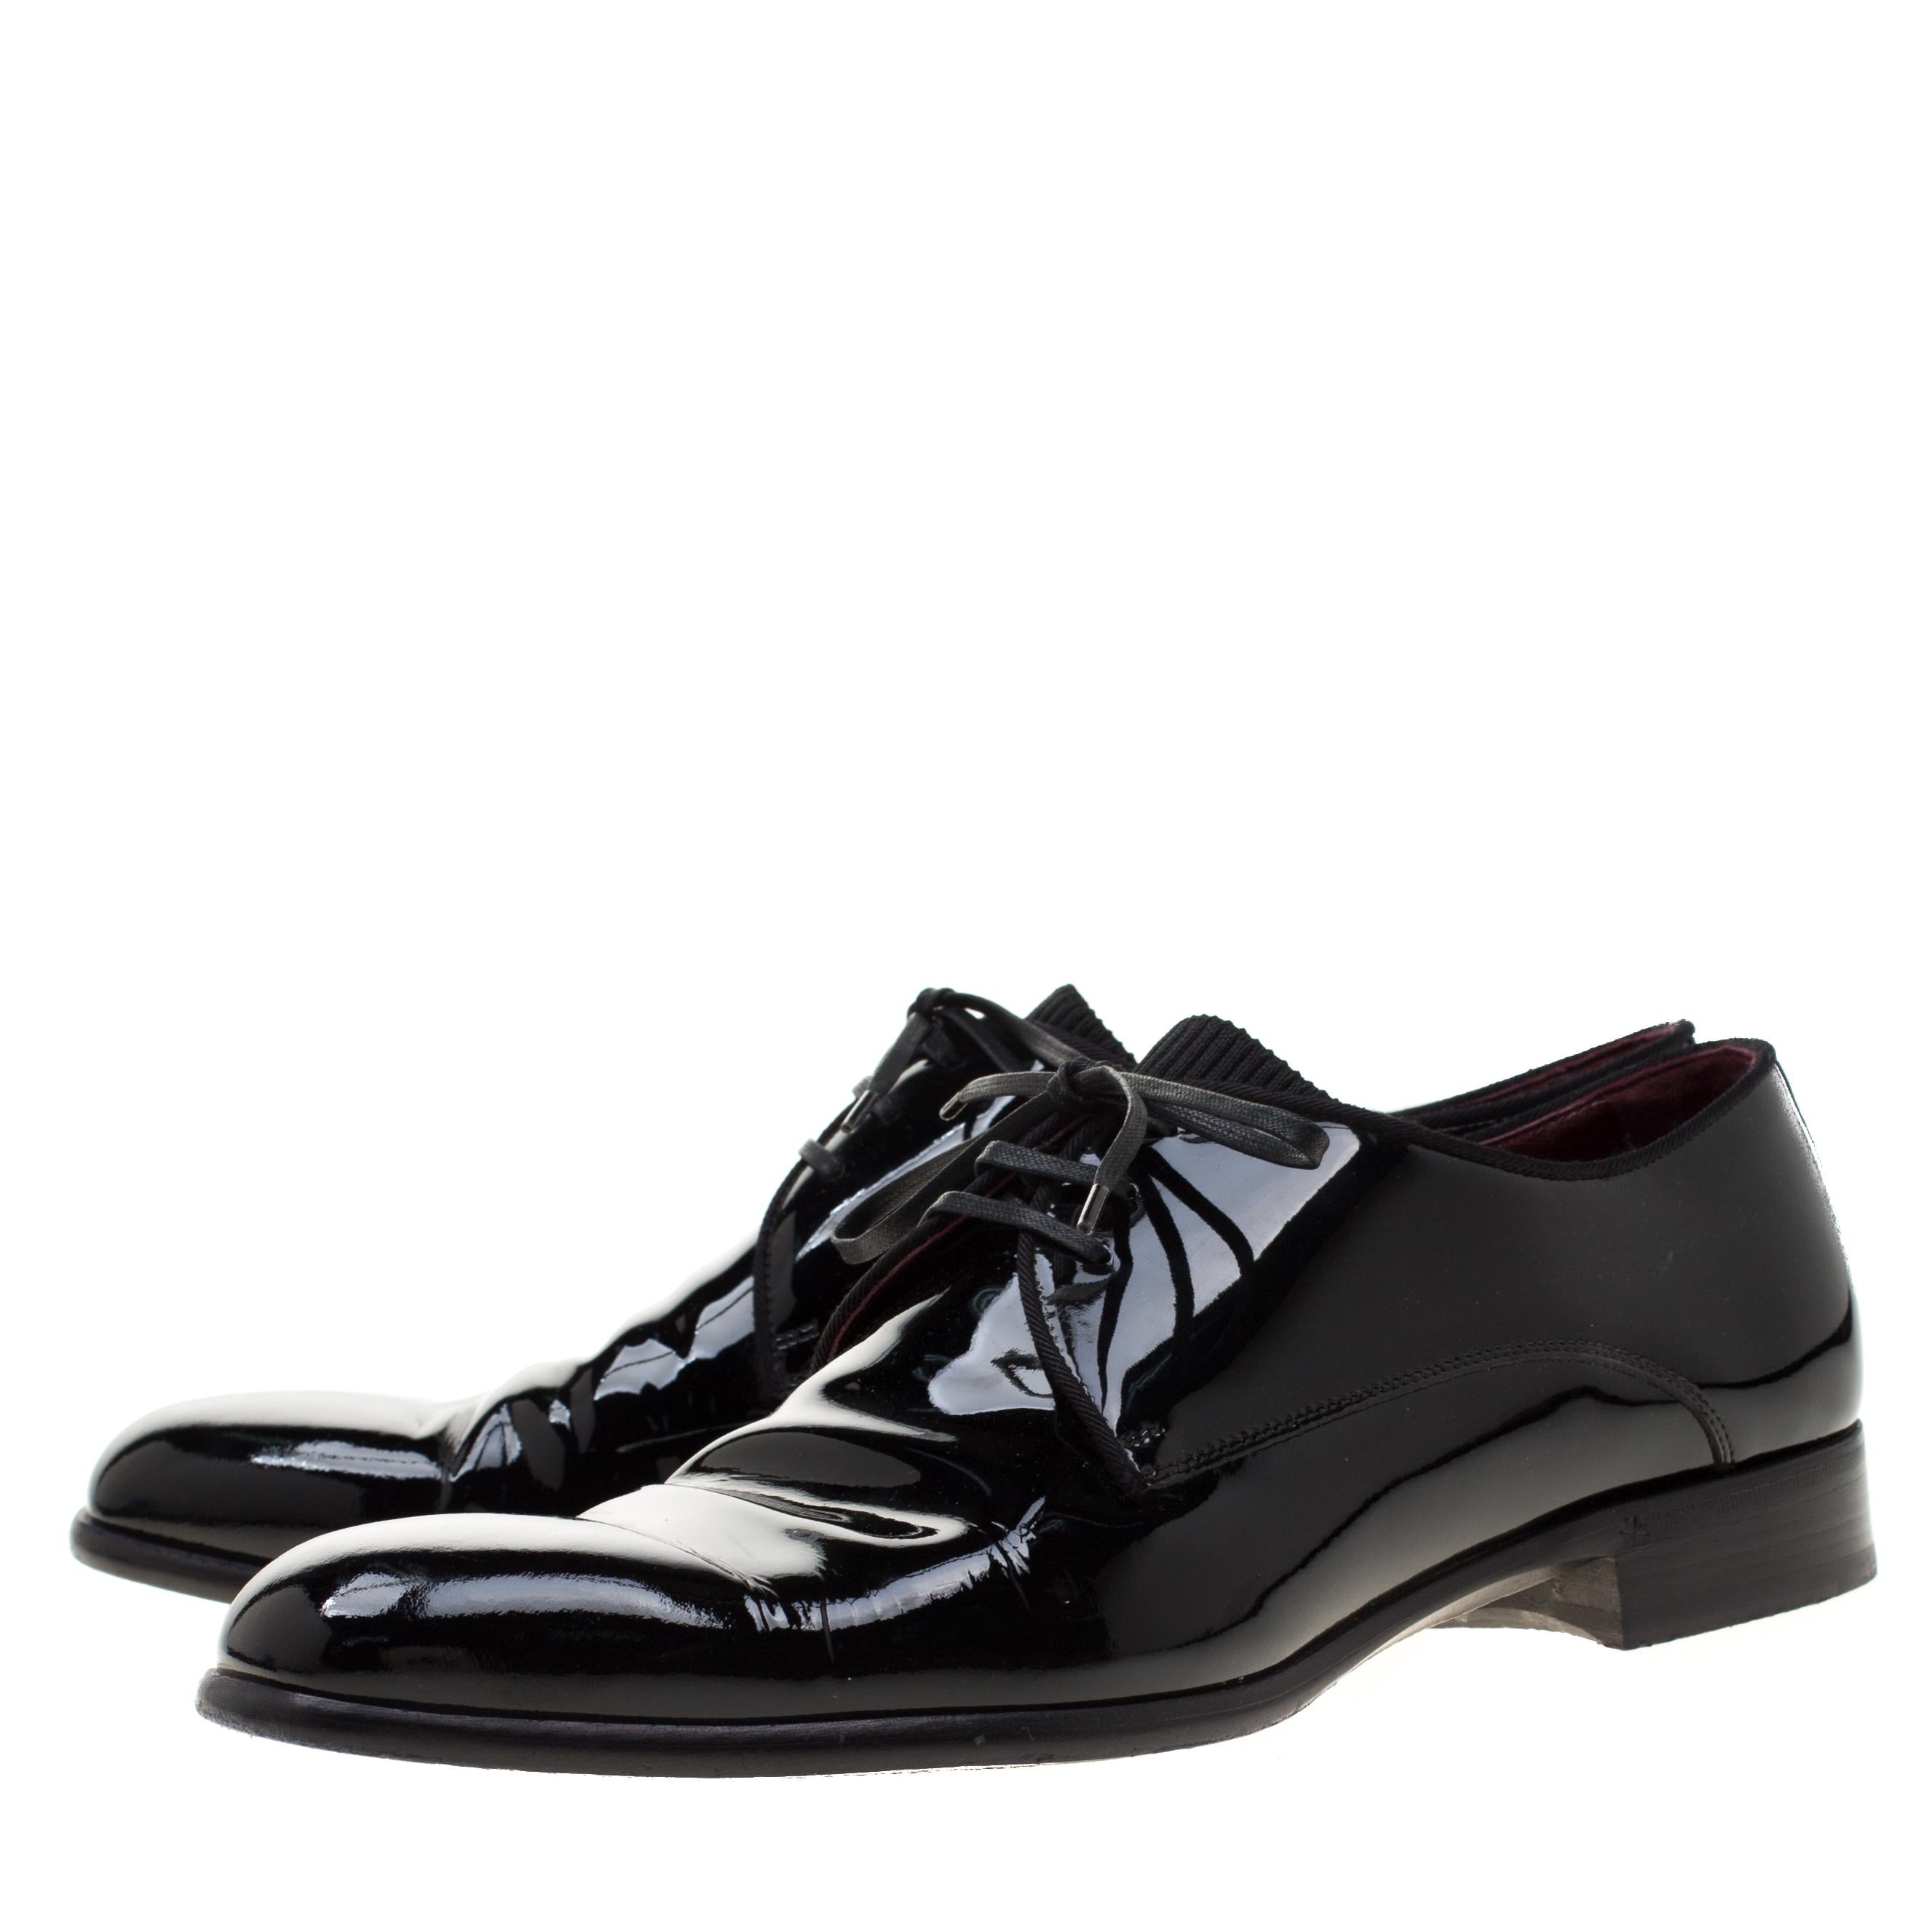 Women's or Men's Dolce & Gabbana Black Patent Leather Derby Oxford Shoes Size 43